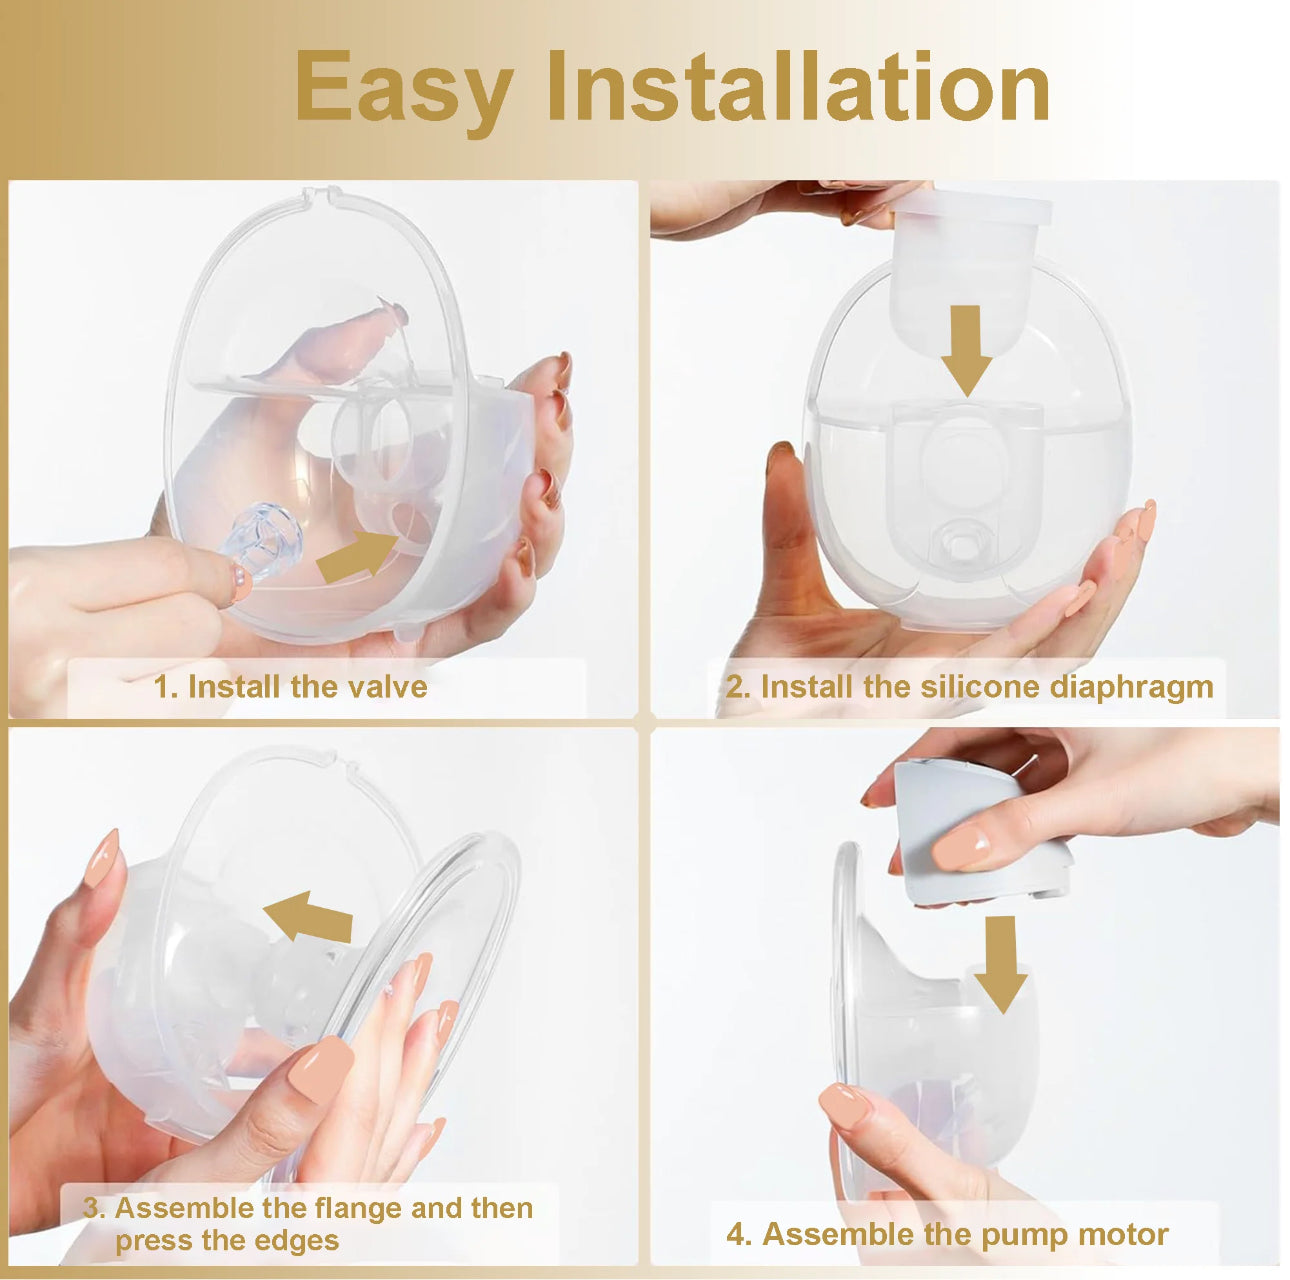 Golden Meadow GM2 - The All **New** Revolutionary Wearable Breast Pump - Single Pump